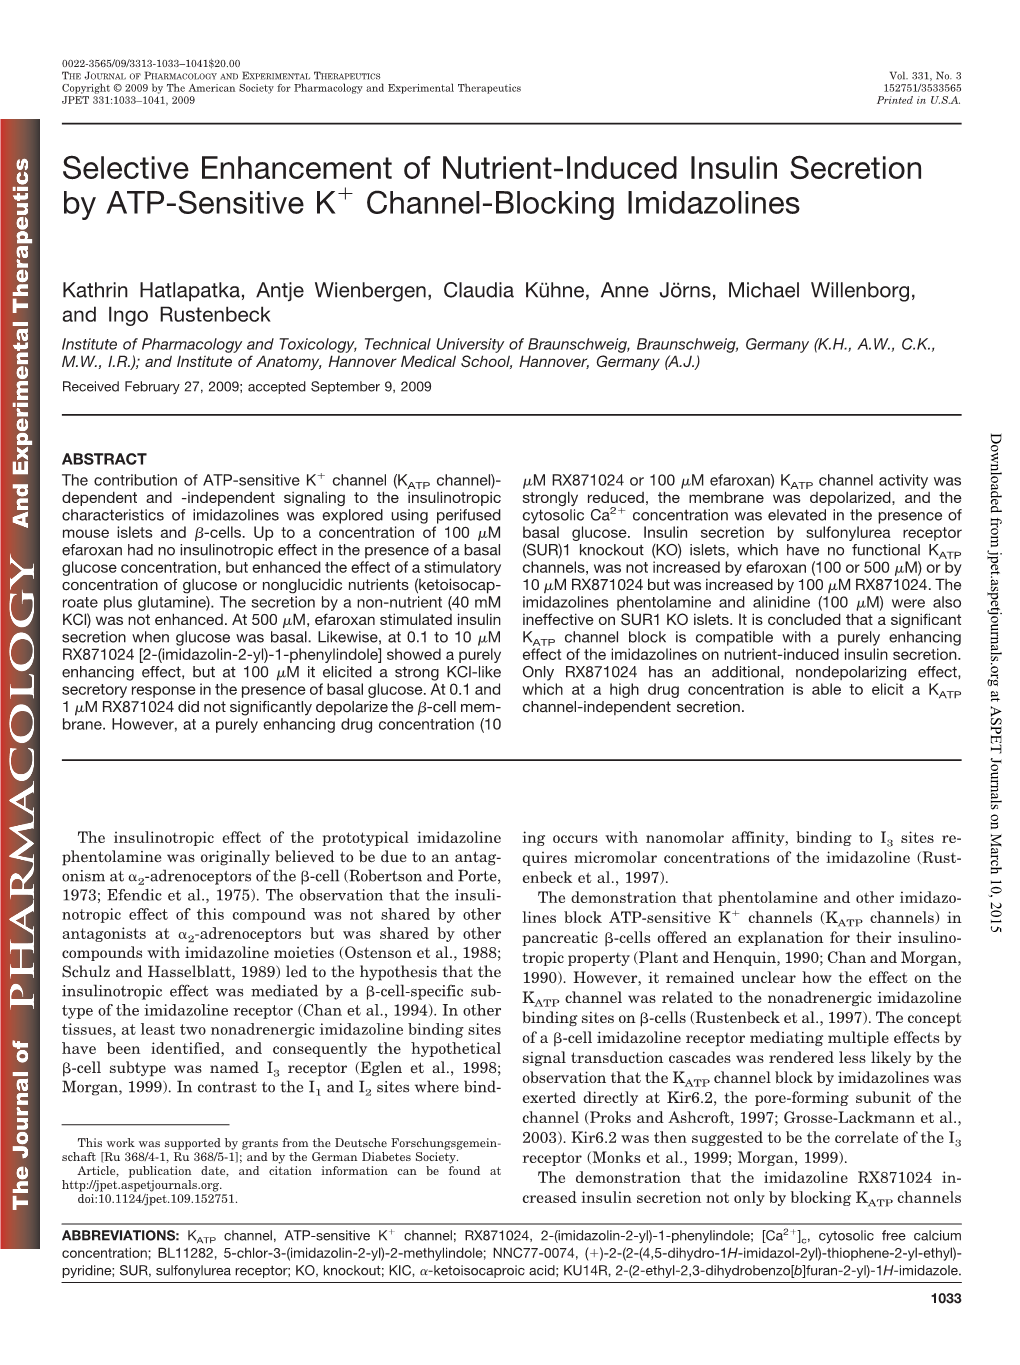 Selective Enhancement of Nutrient-Induced Insulin Secretion by ATP-Sensitive Kϩ Channel-Blocking Imidazolines